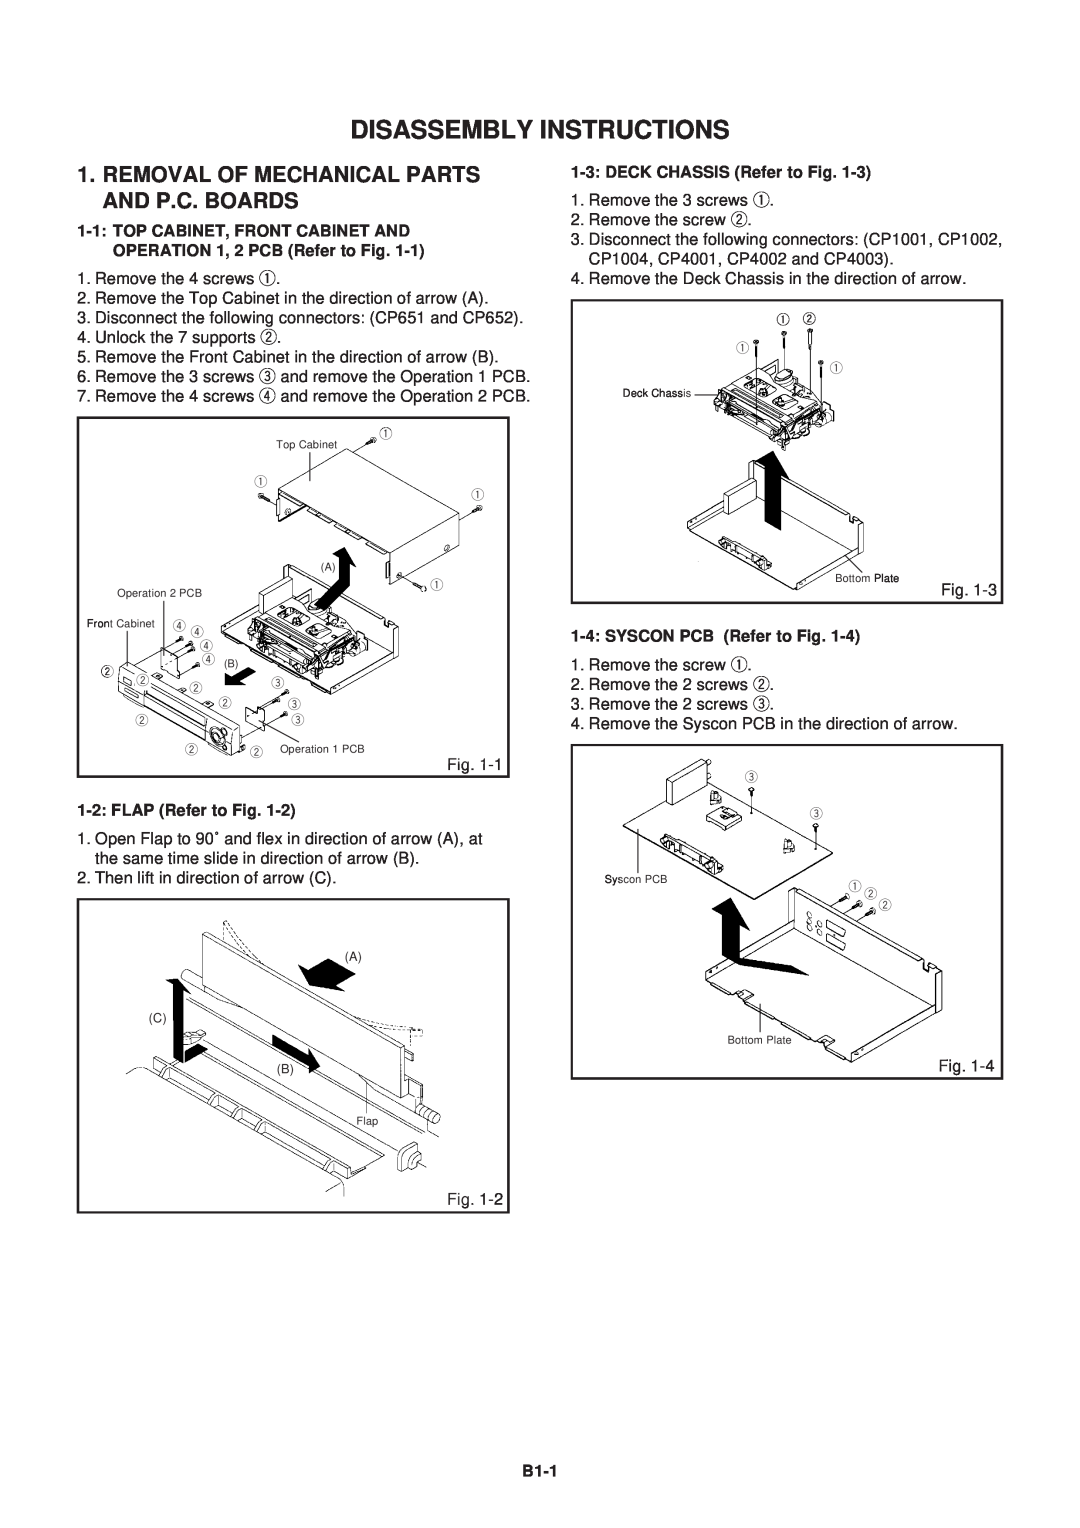 Aiwa HV-FX5100 Disassembly Instructions, Removal Of Mechanical Parts And P.C. Boards, FLAP Refer to Fig, B1-1 